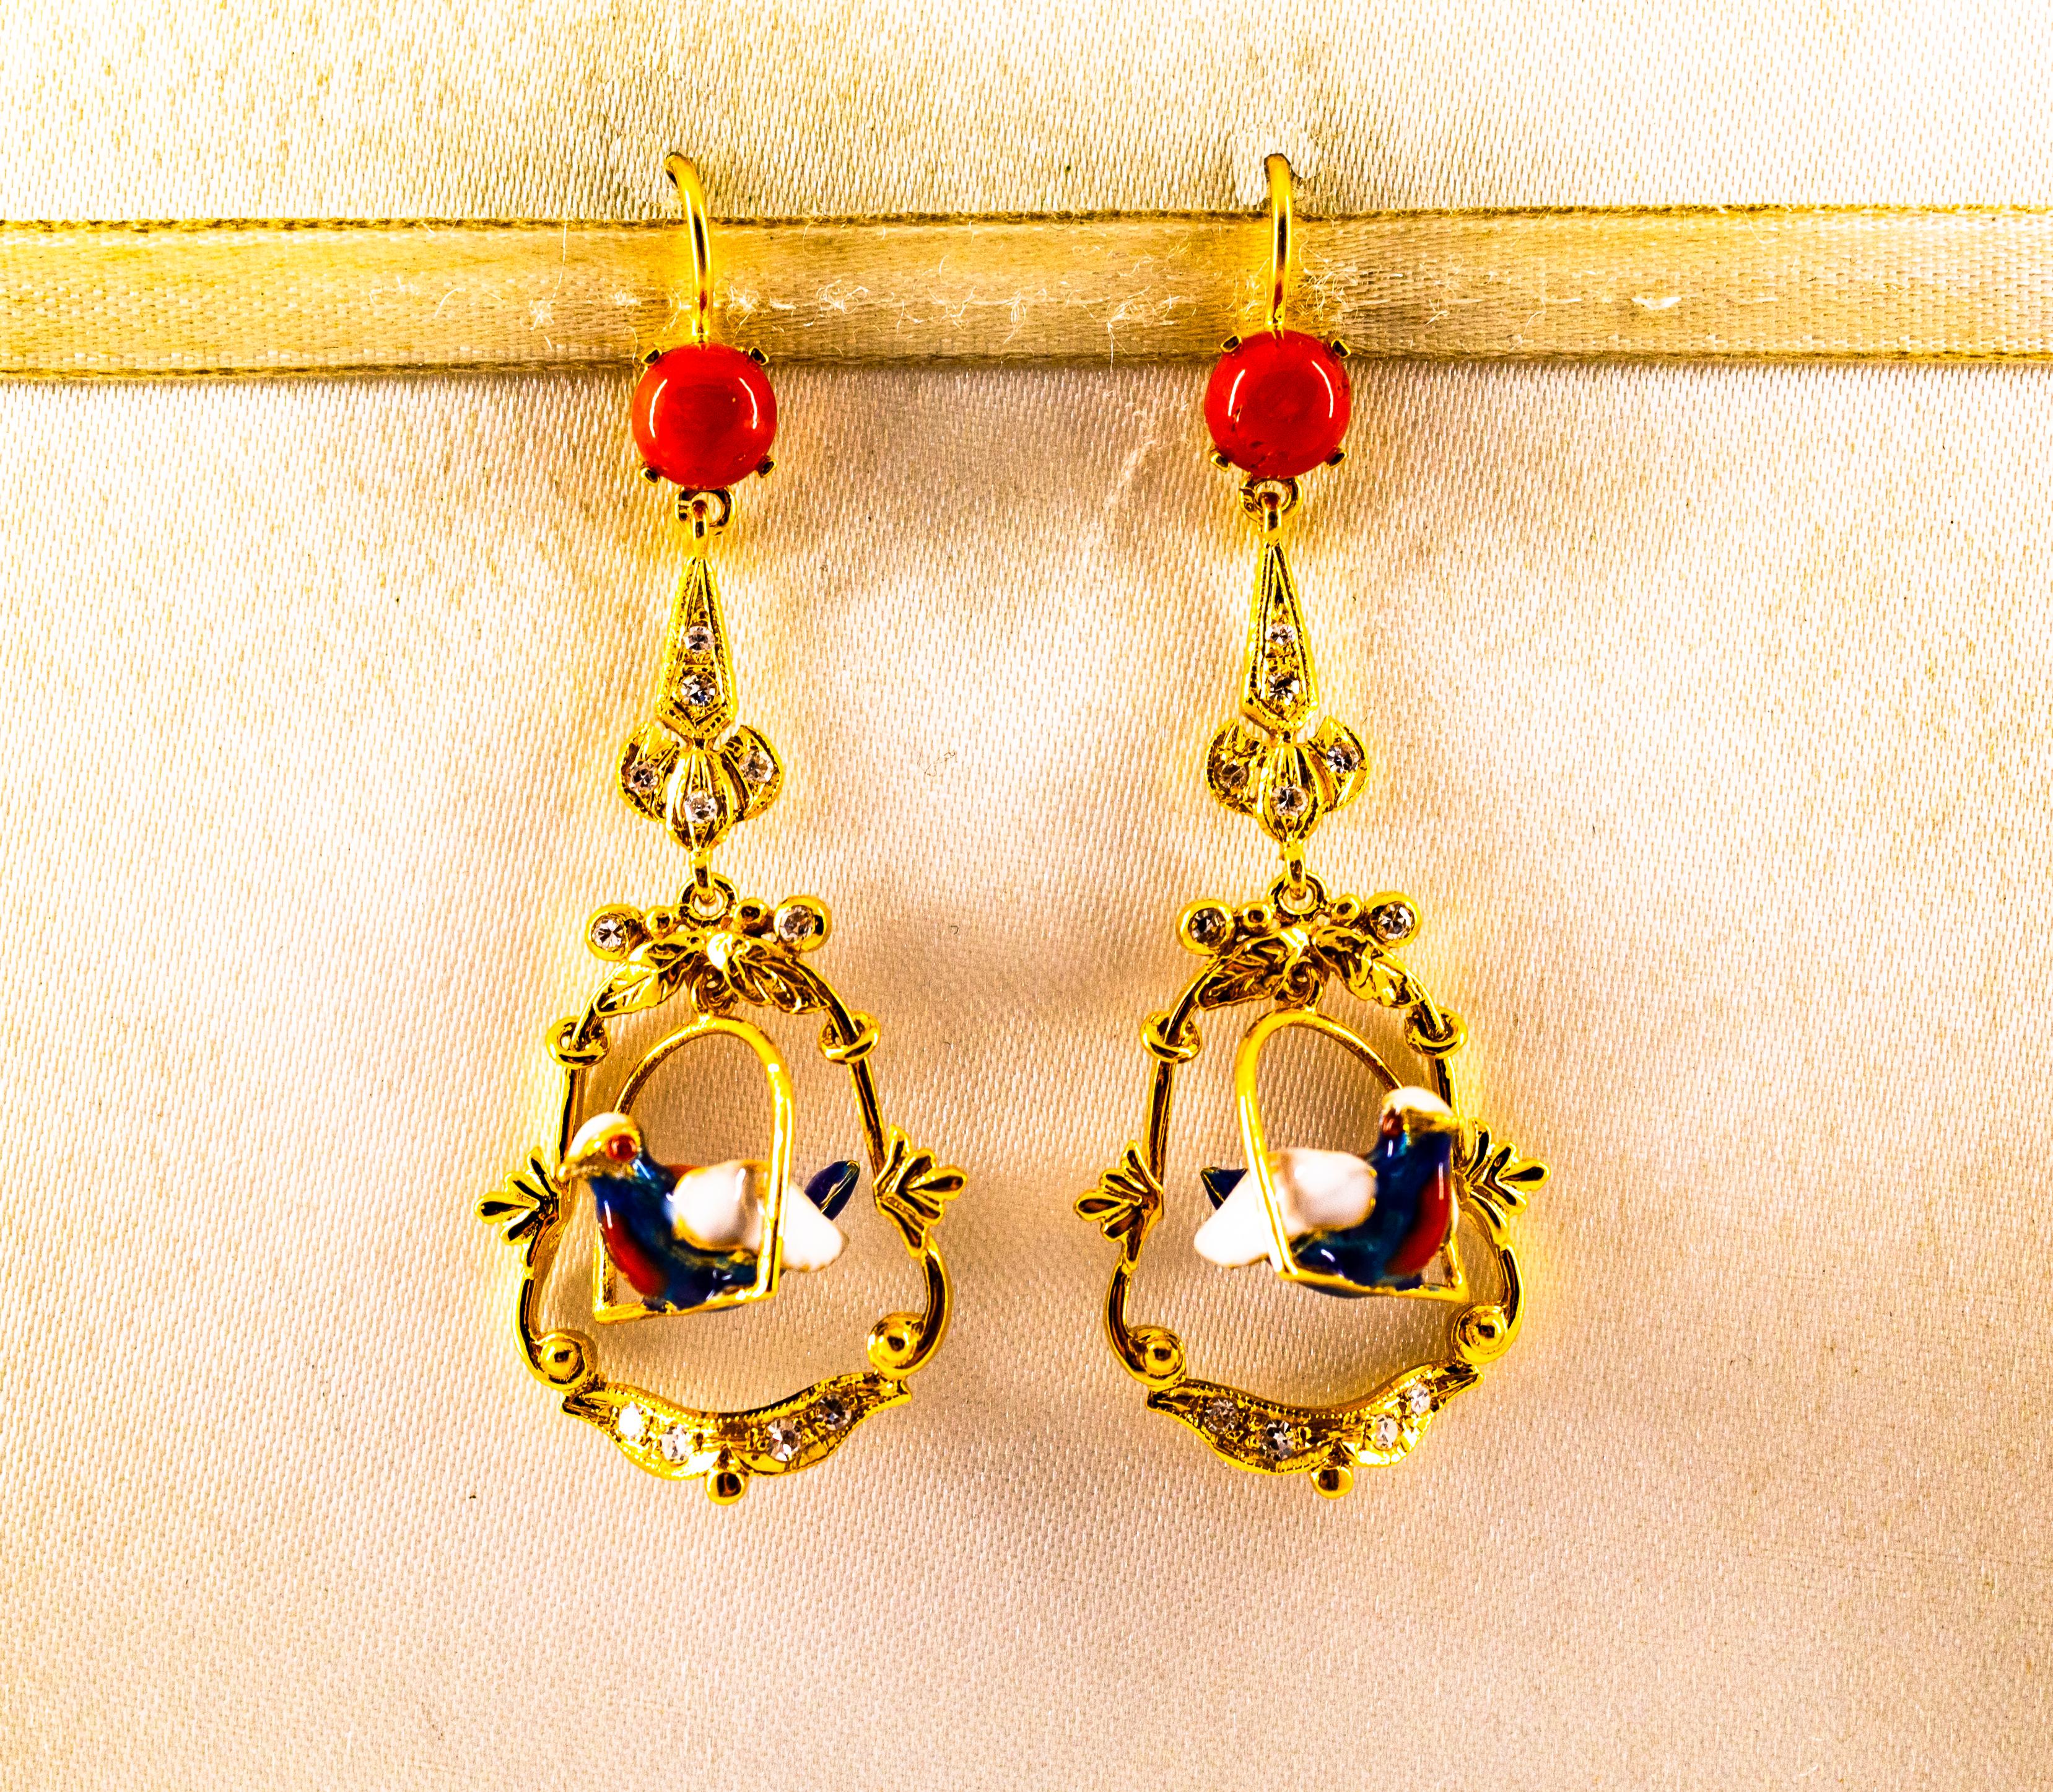 These Stud Drop Earrings are made of 14K Yellow Gold.
These Earrings have 0.40 Carats of White Diamonds.
These Earrings have Mediterranean (Sardinia, Italy) Red Coral.
These Earrings have also Enamel.
All our Earrings have pins for pierced ears but